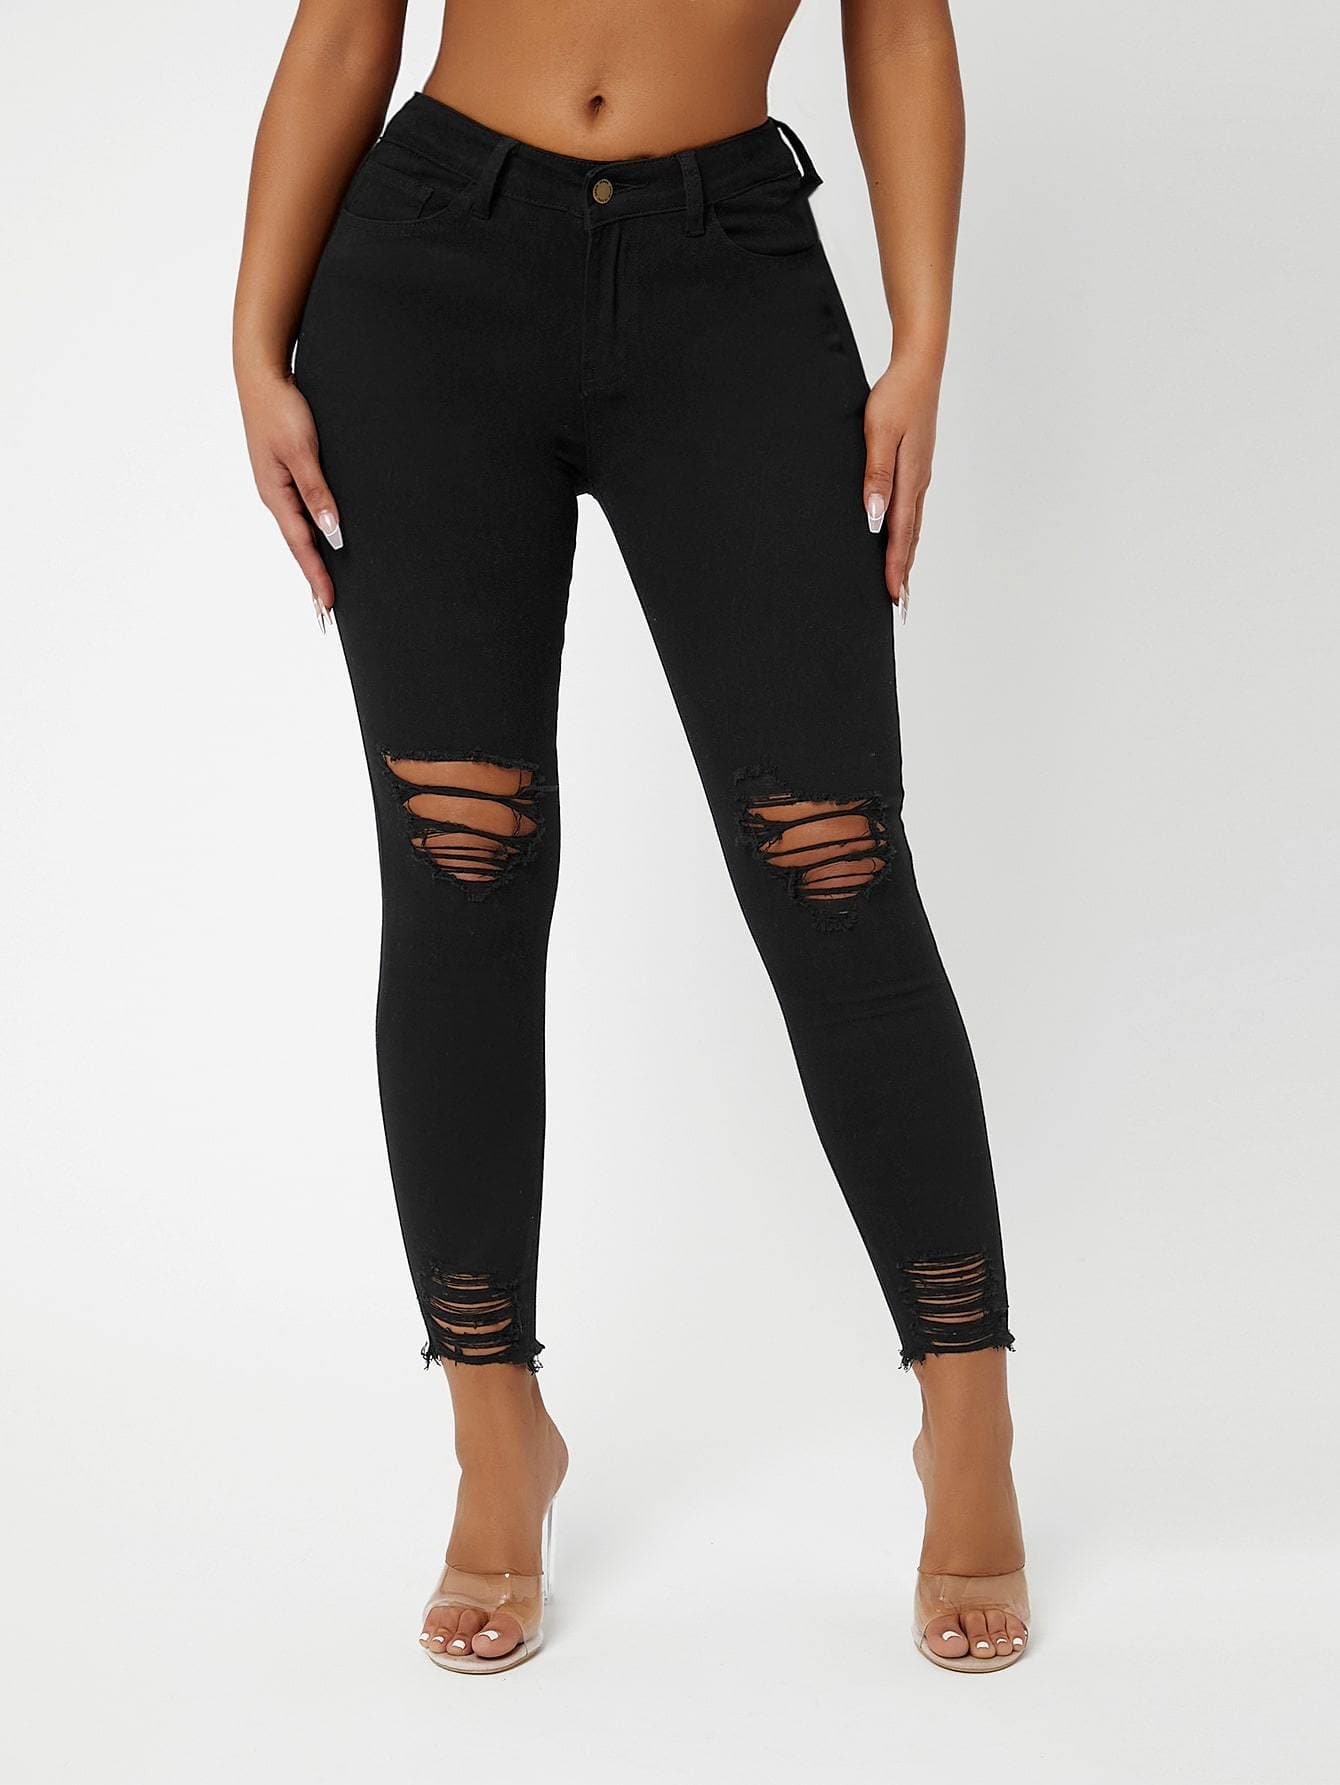 Blue Ripped High Waist Ashleigh Skinny Jeans | New Look